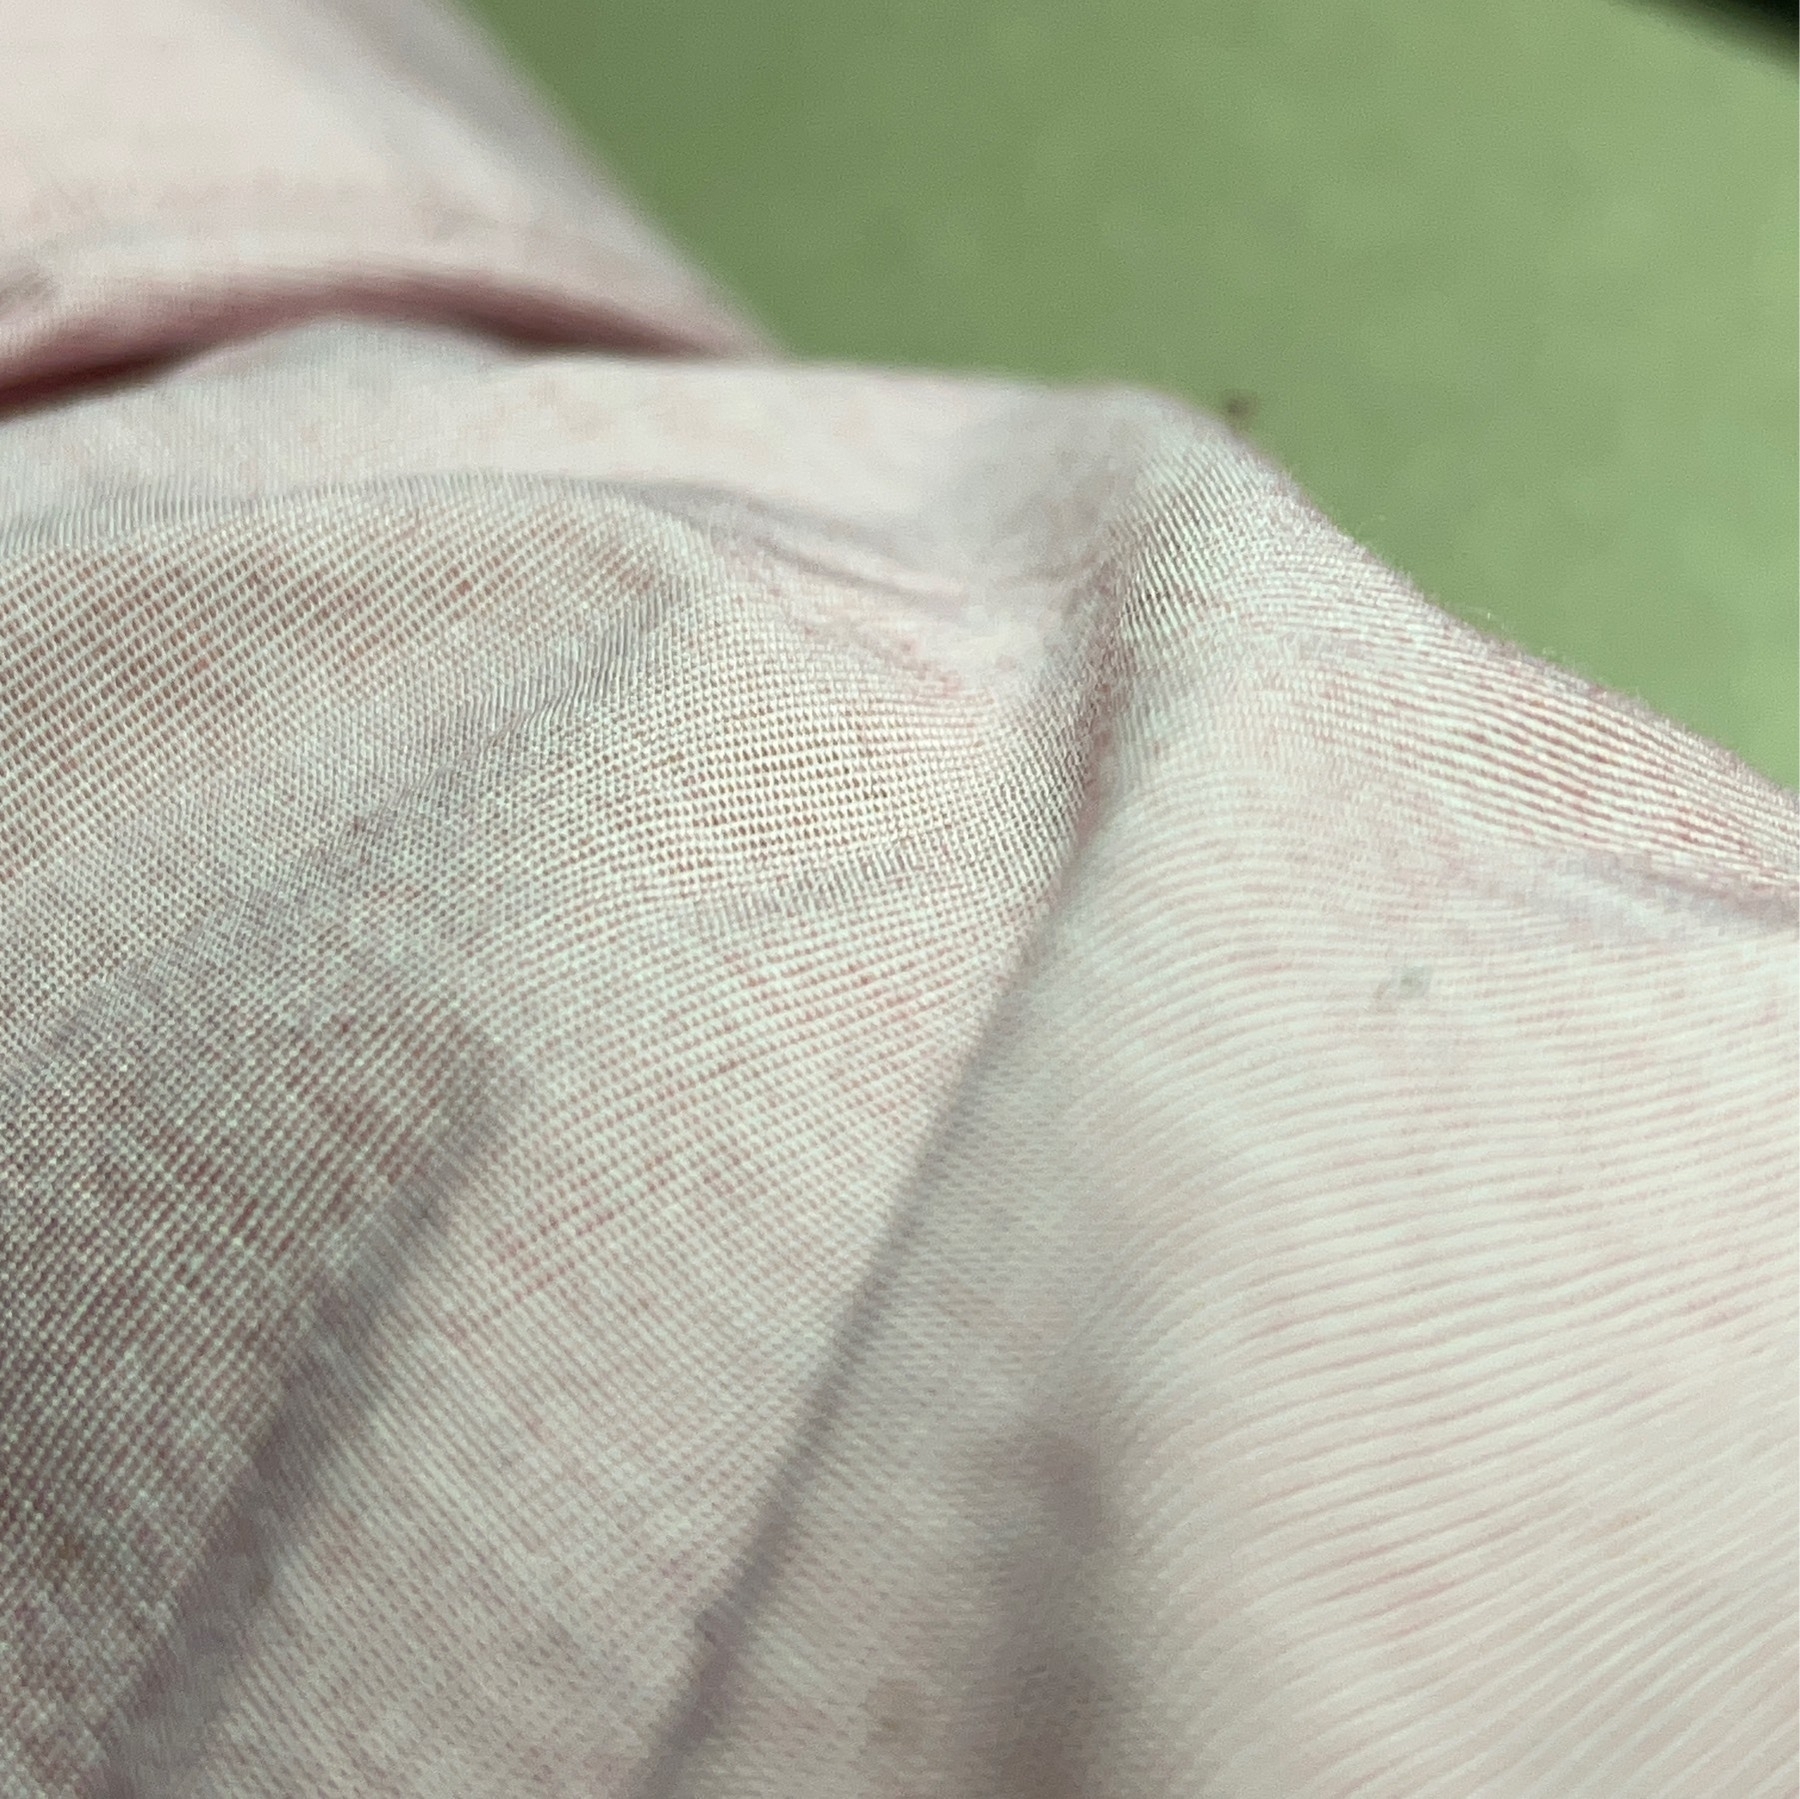 Macro photo of pink poplin fabric of a shirt with some wrinkles in it. 